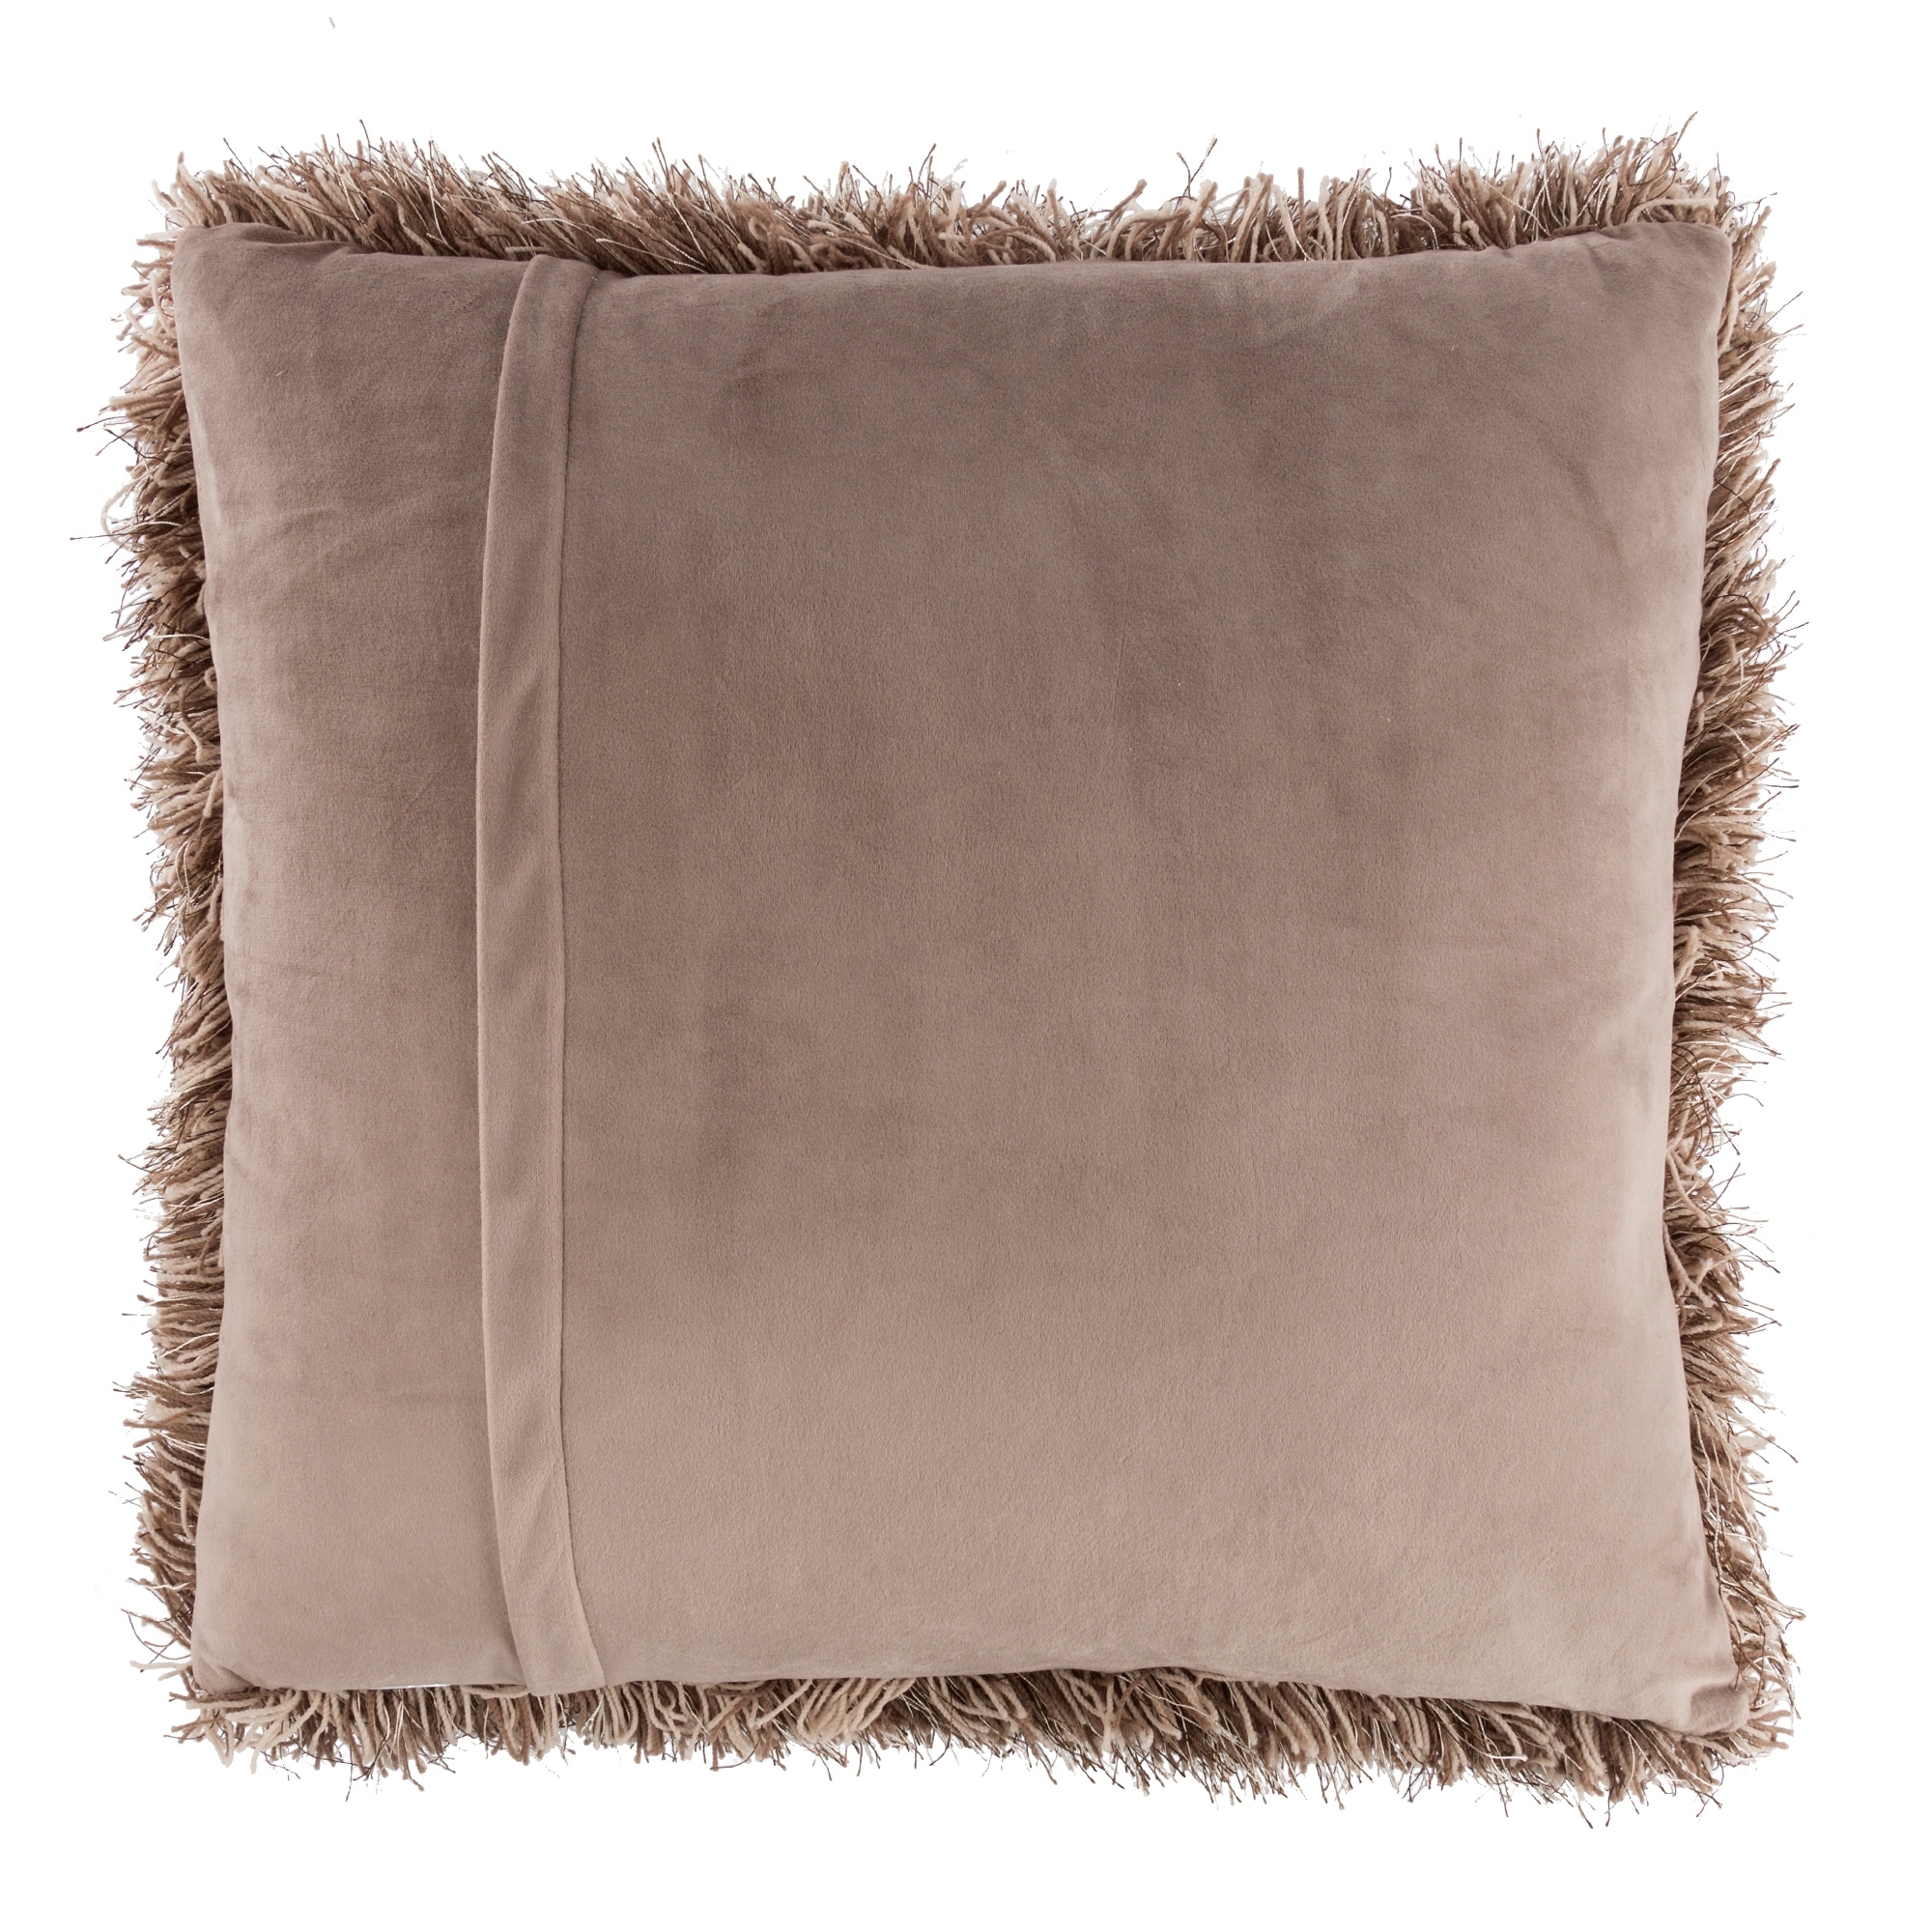 https://ak1.ostkcdn.com/images/products/is/images/direct/05854d8fea9e1b62ce5ca9ea2ce049d68c7c1902/Oversized-Floor-or-Throw-Pillow-Square-Shag-FauxFur-by-Windsor-Home.jpg